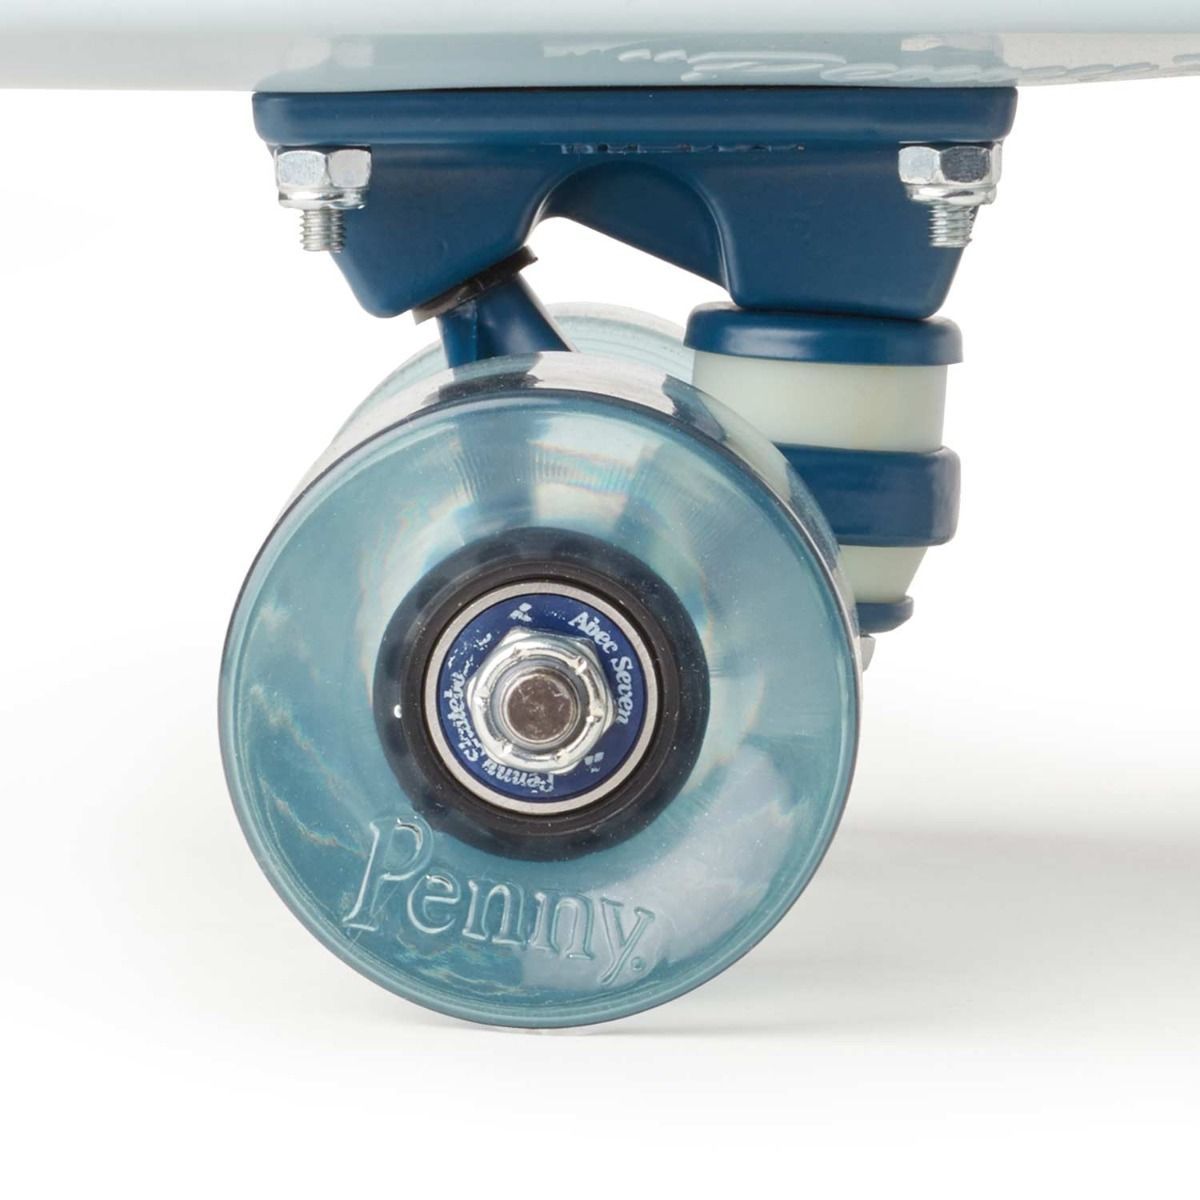 PENNY COMPLETE ICE 22in - The Drive Skateshop